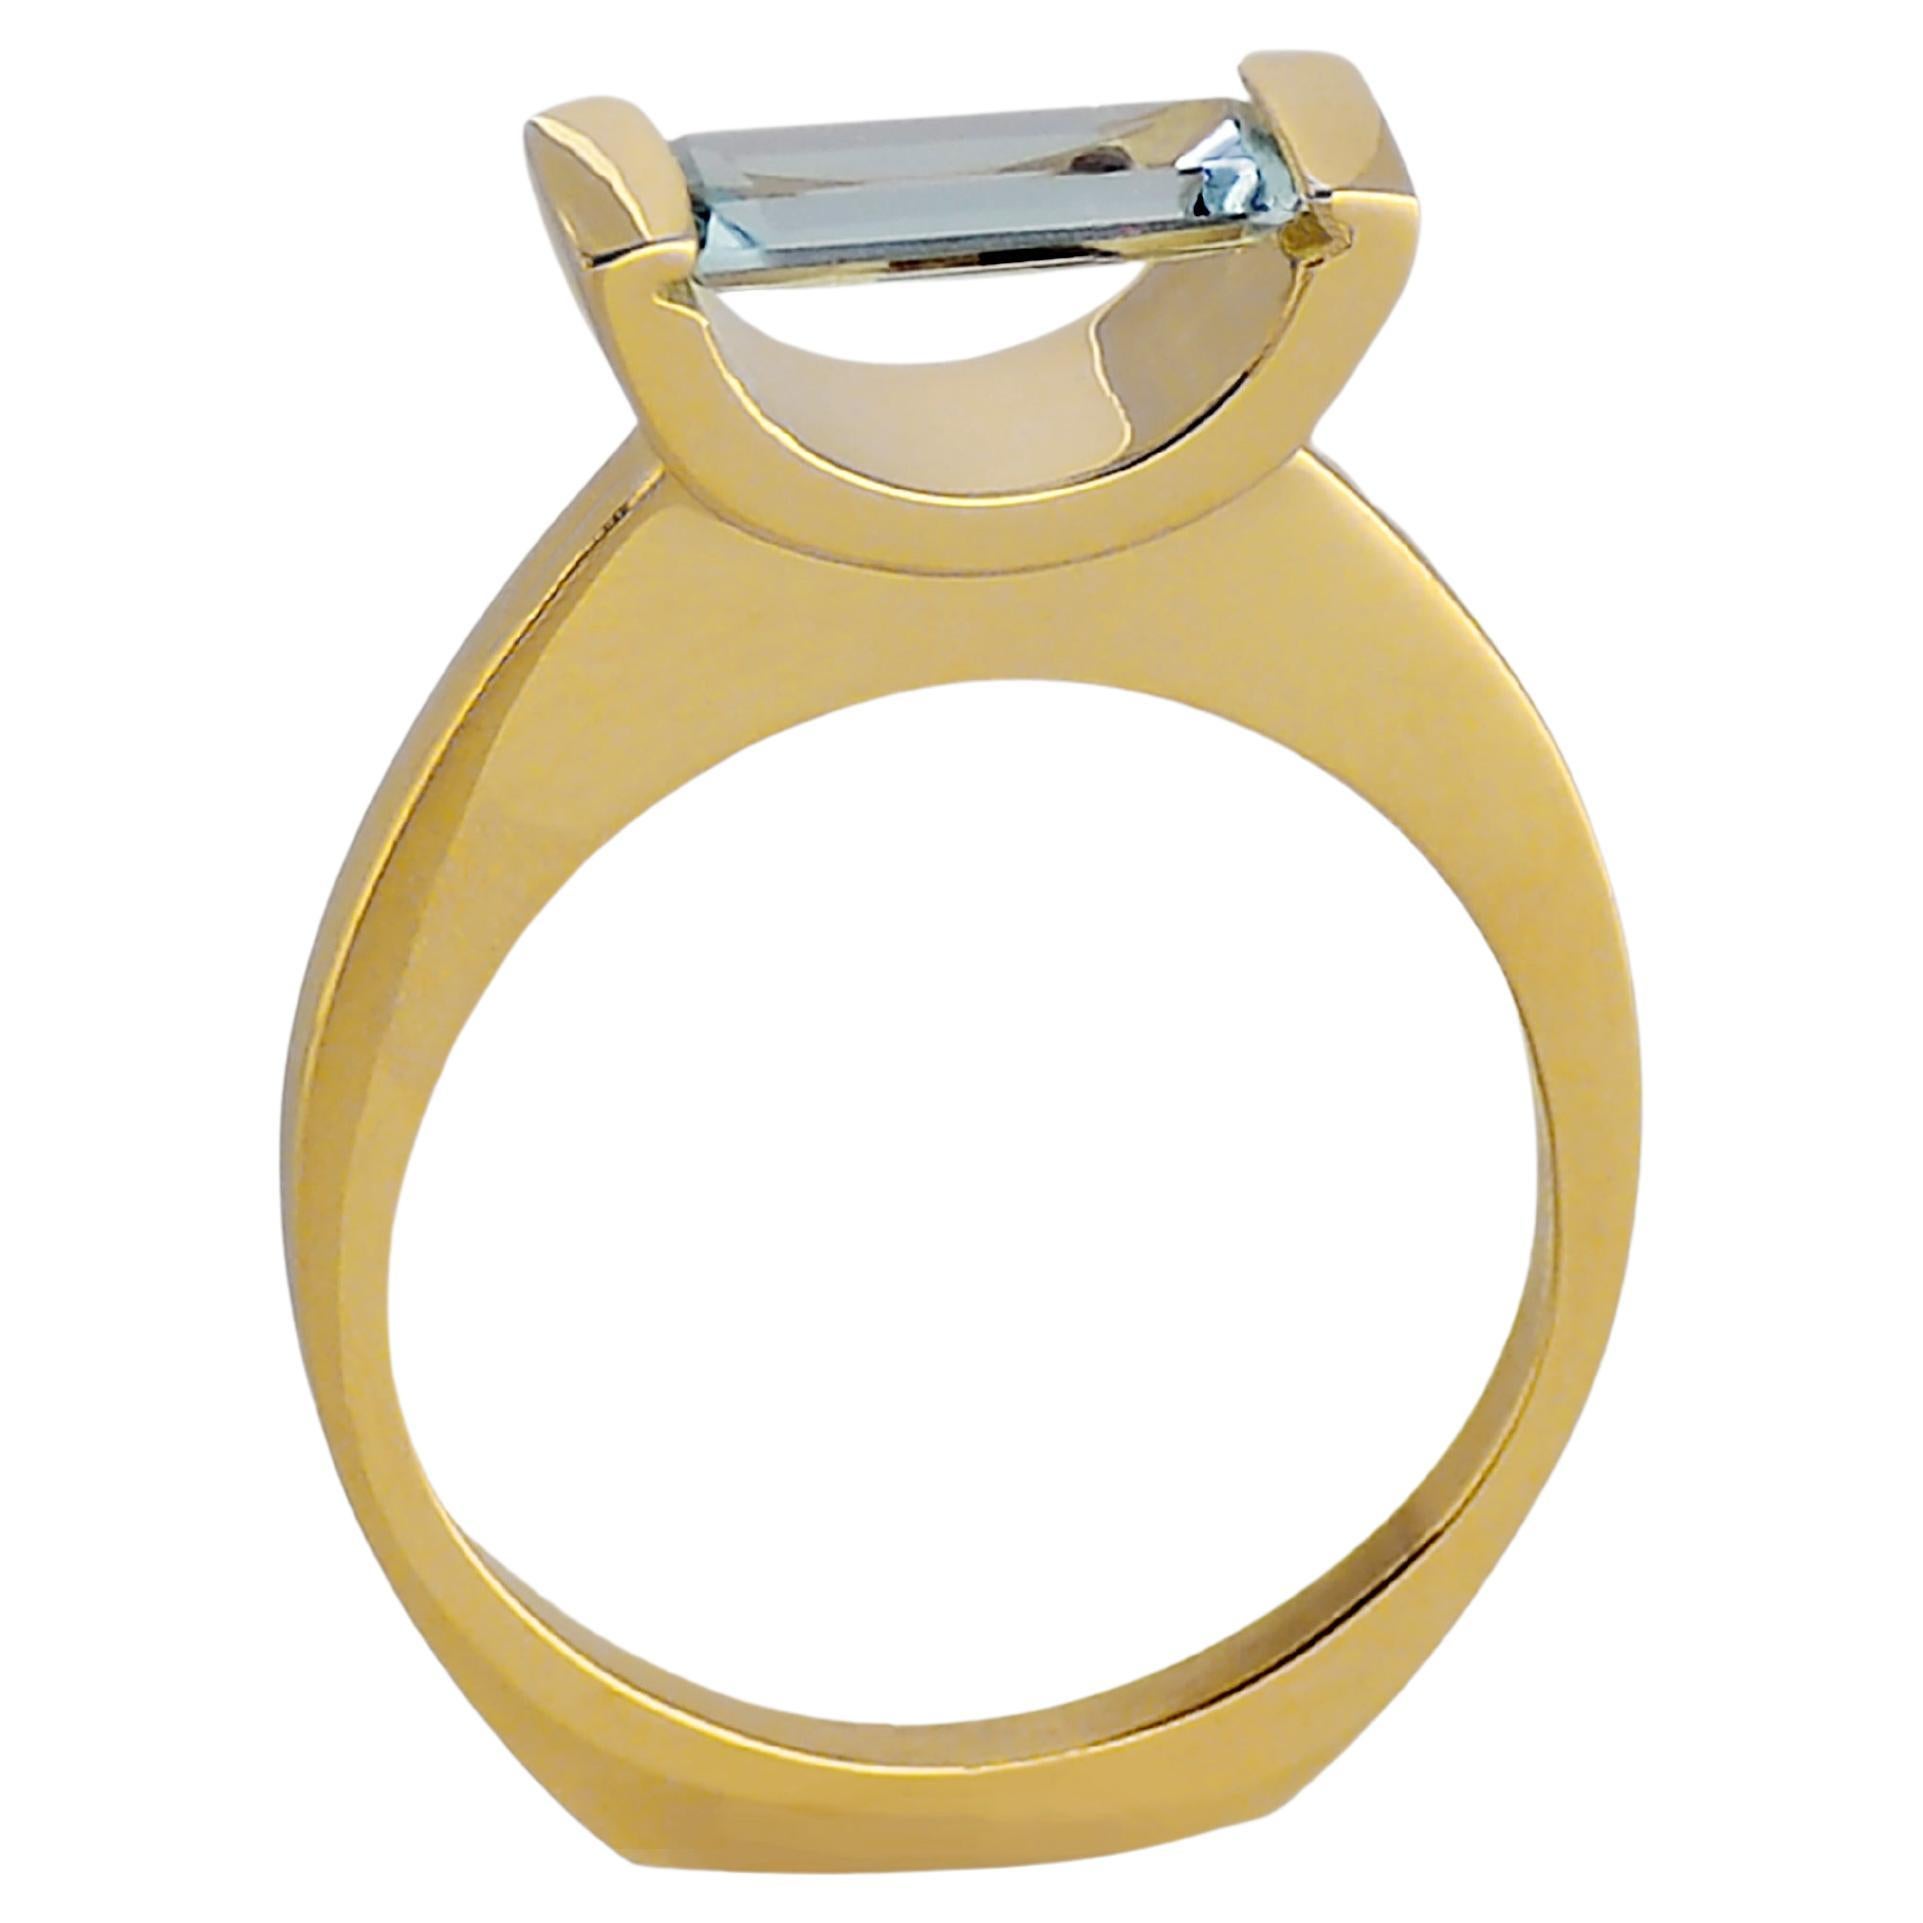 Susan Crow Studio Fairmined Gold and Aquamarine Sliver of Water Ring